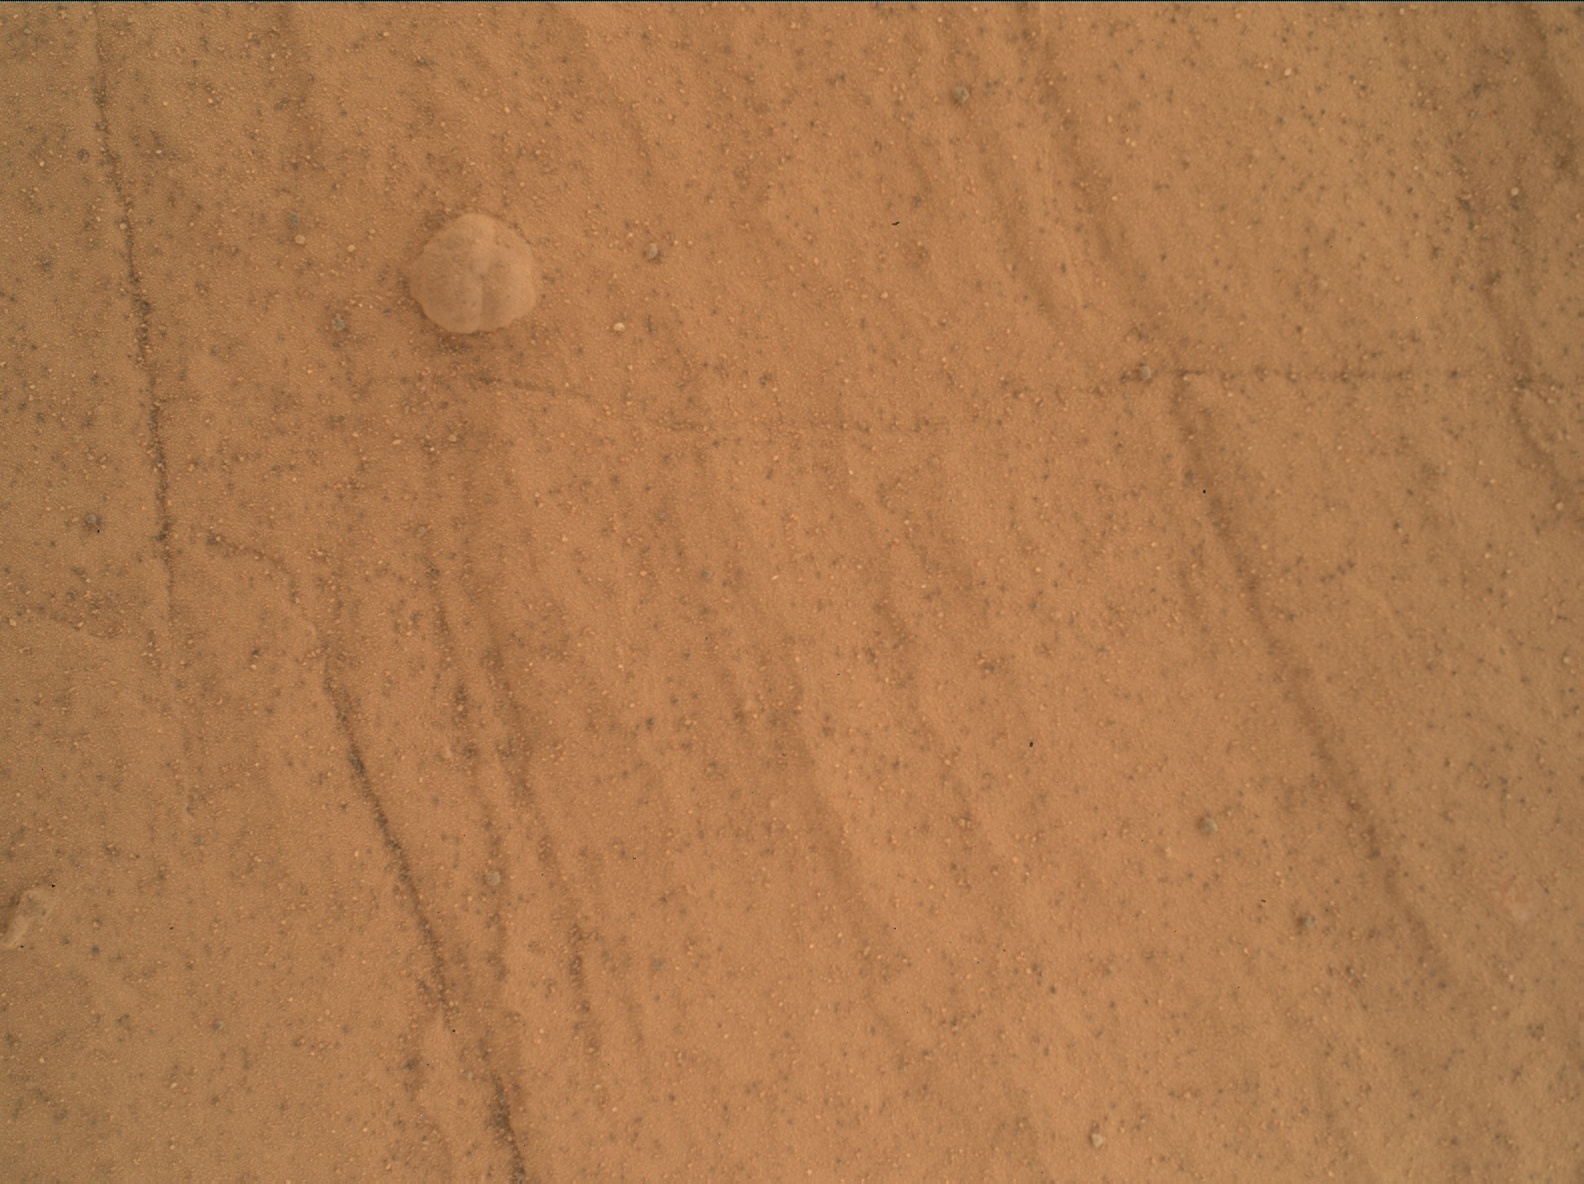 Nasa's Mars rover Curiosity acquired this image using its Mars Hand Lens Imager (MAHLI) on Sol 1753